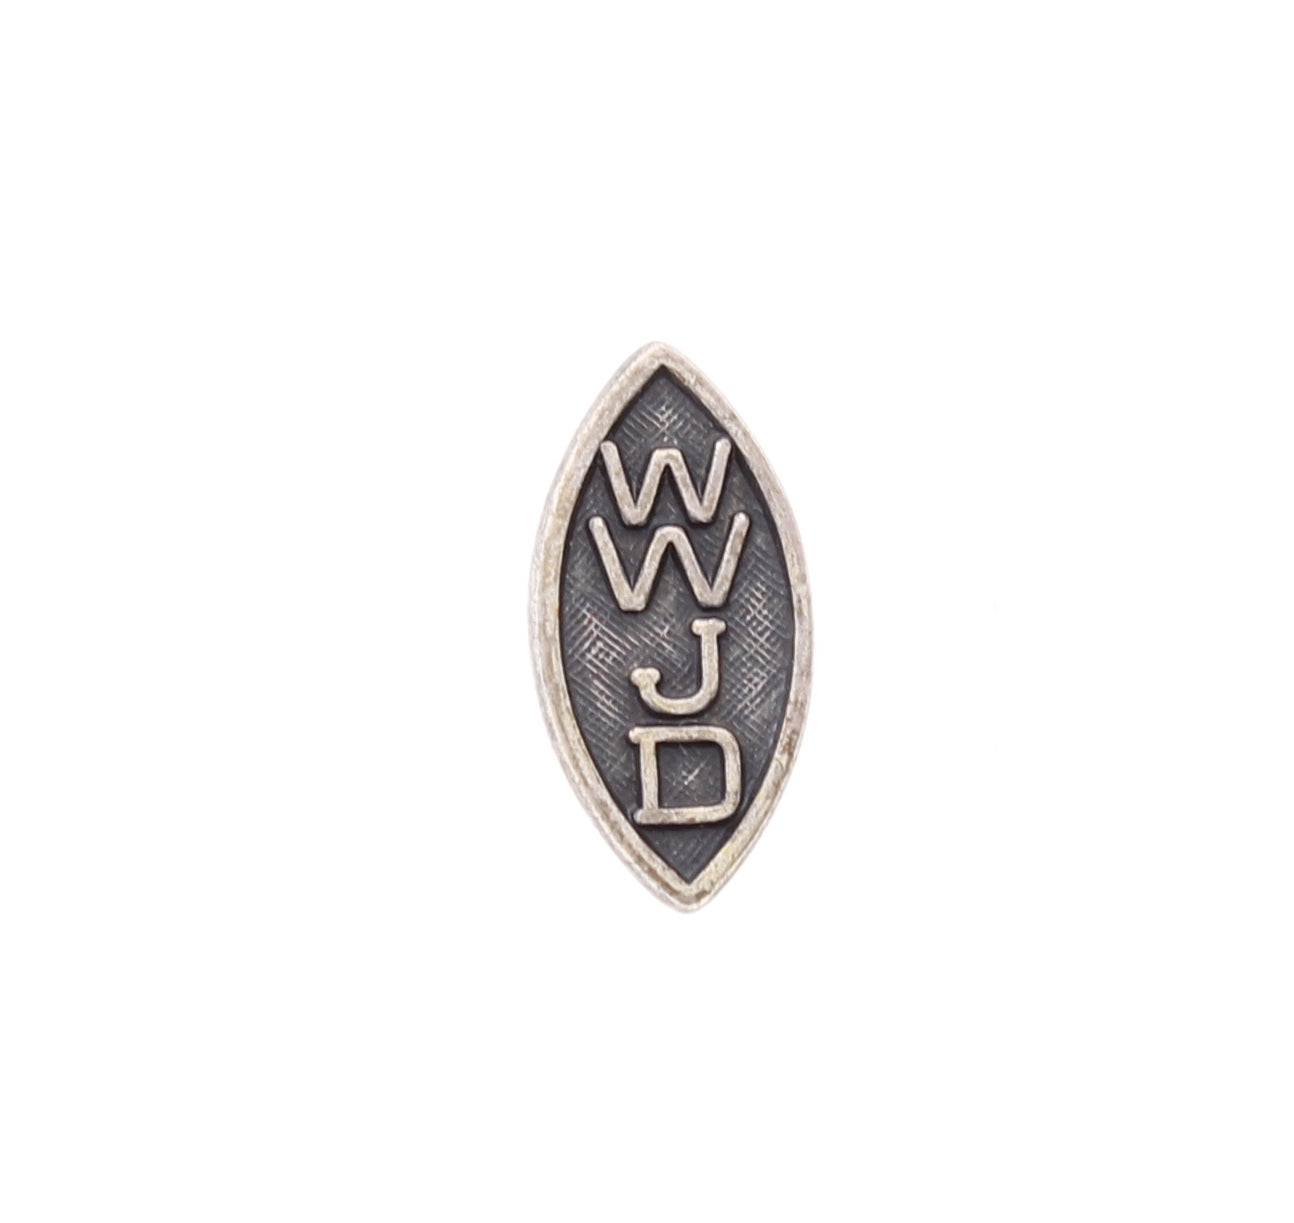 16mm x 8mm Small WWJD charm stamping, Classic Silver, Made in USA, pack of 6